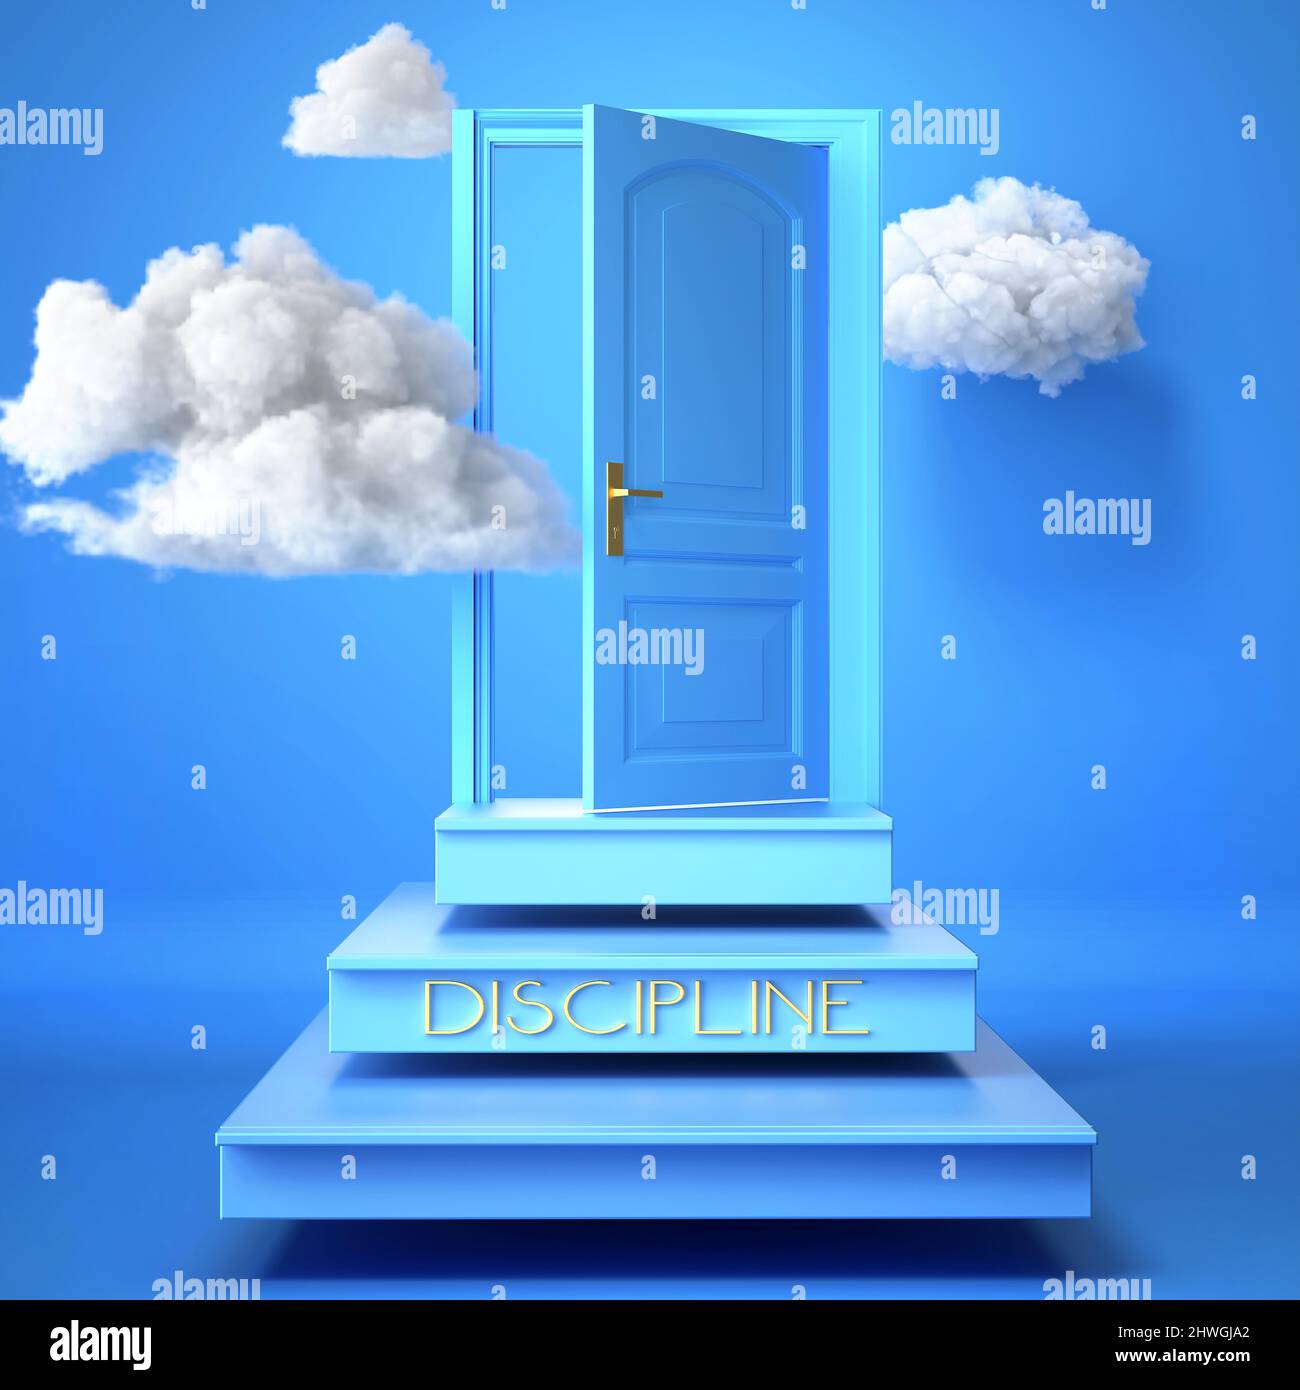 Discipline and success, progress and effort - concept 3d render. Ideas of work and goals symbolized by steps leading to an opening doors within clouds Stock Photo